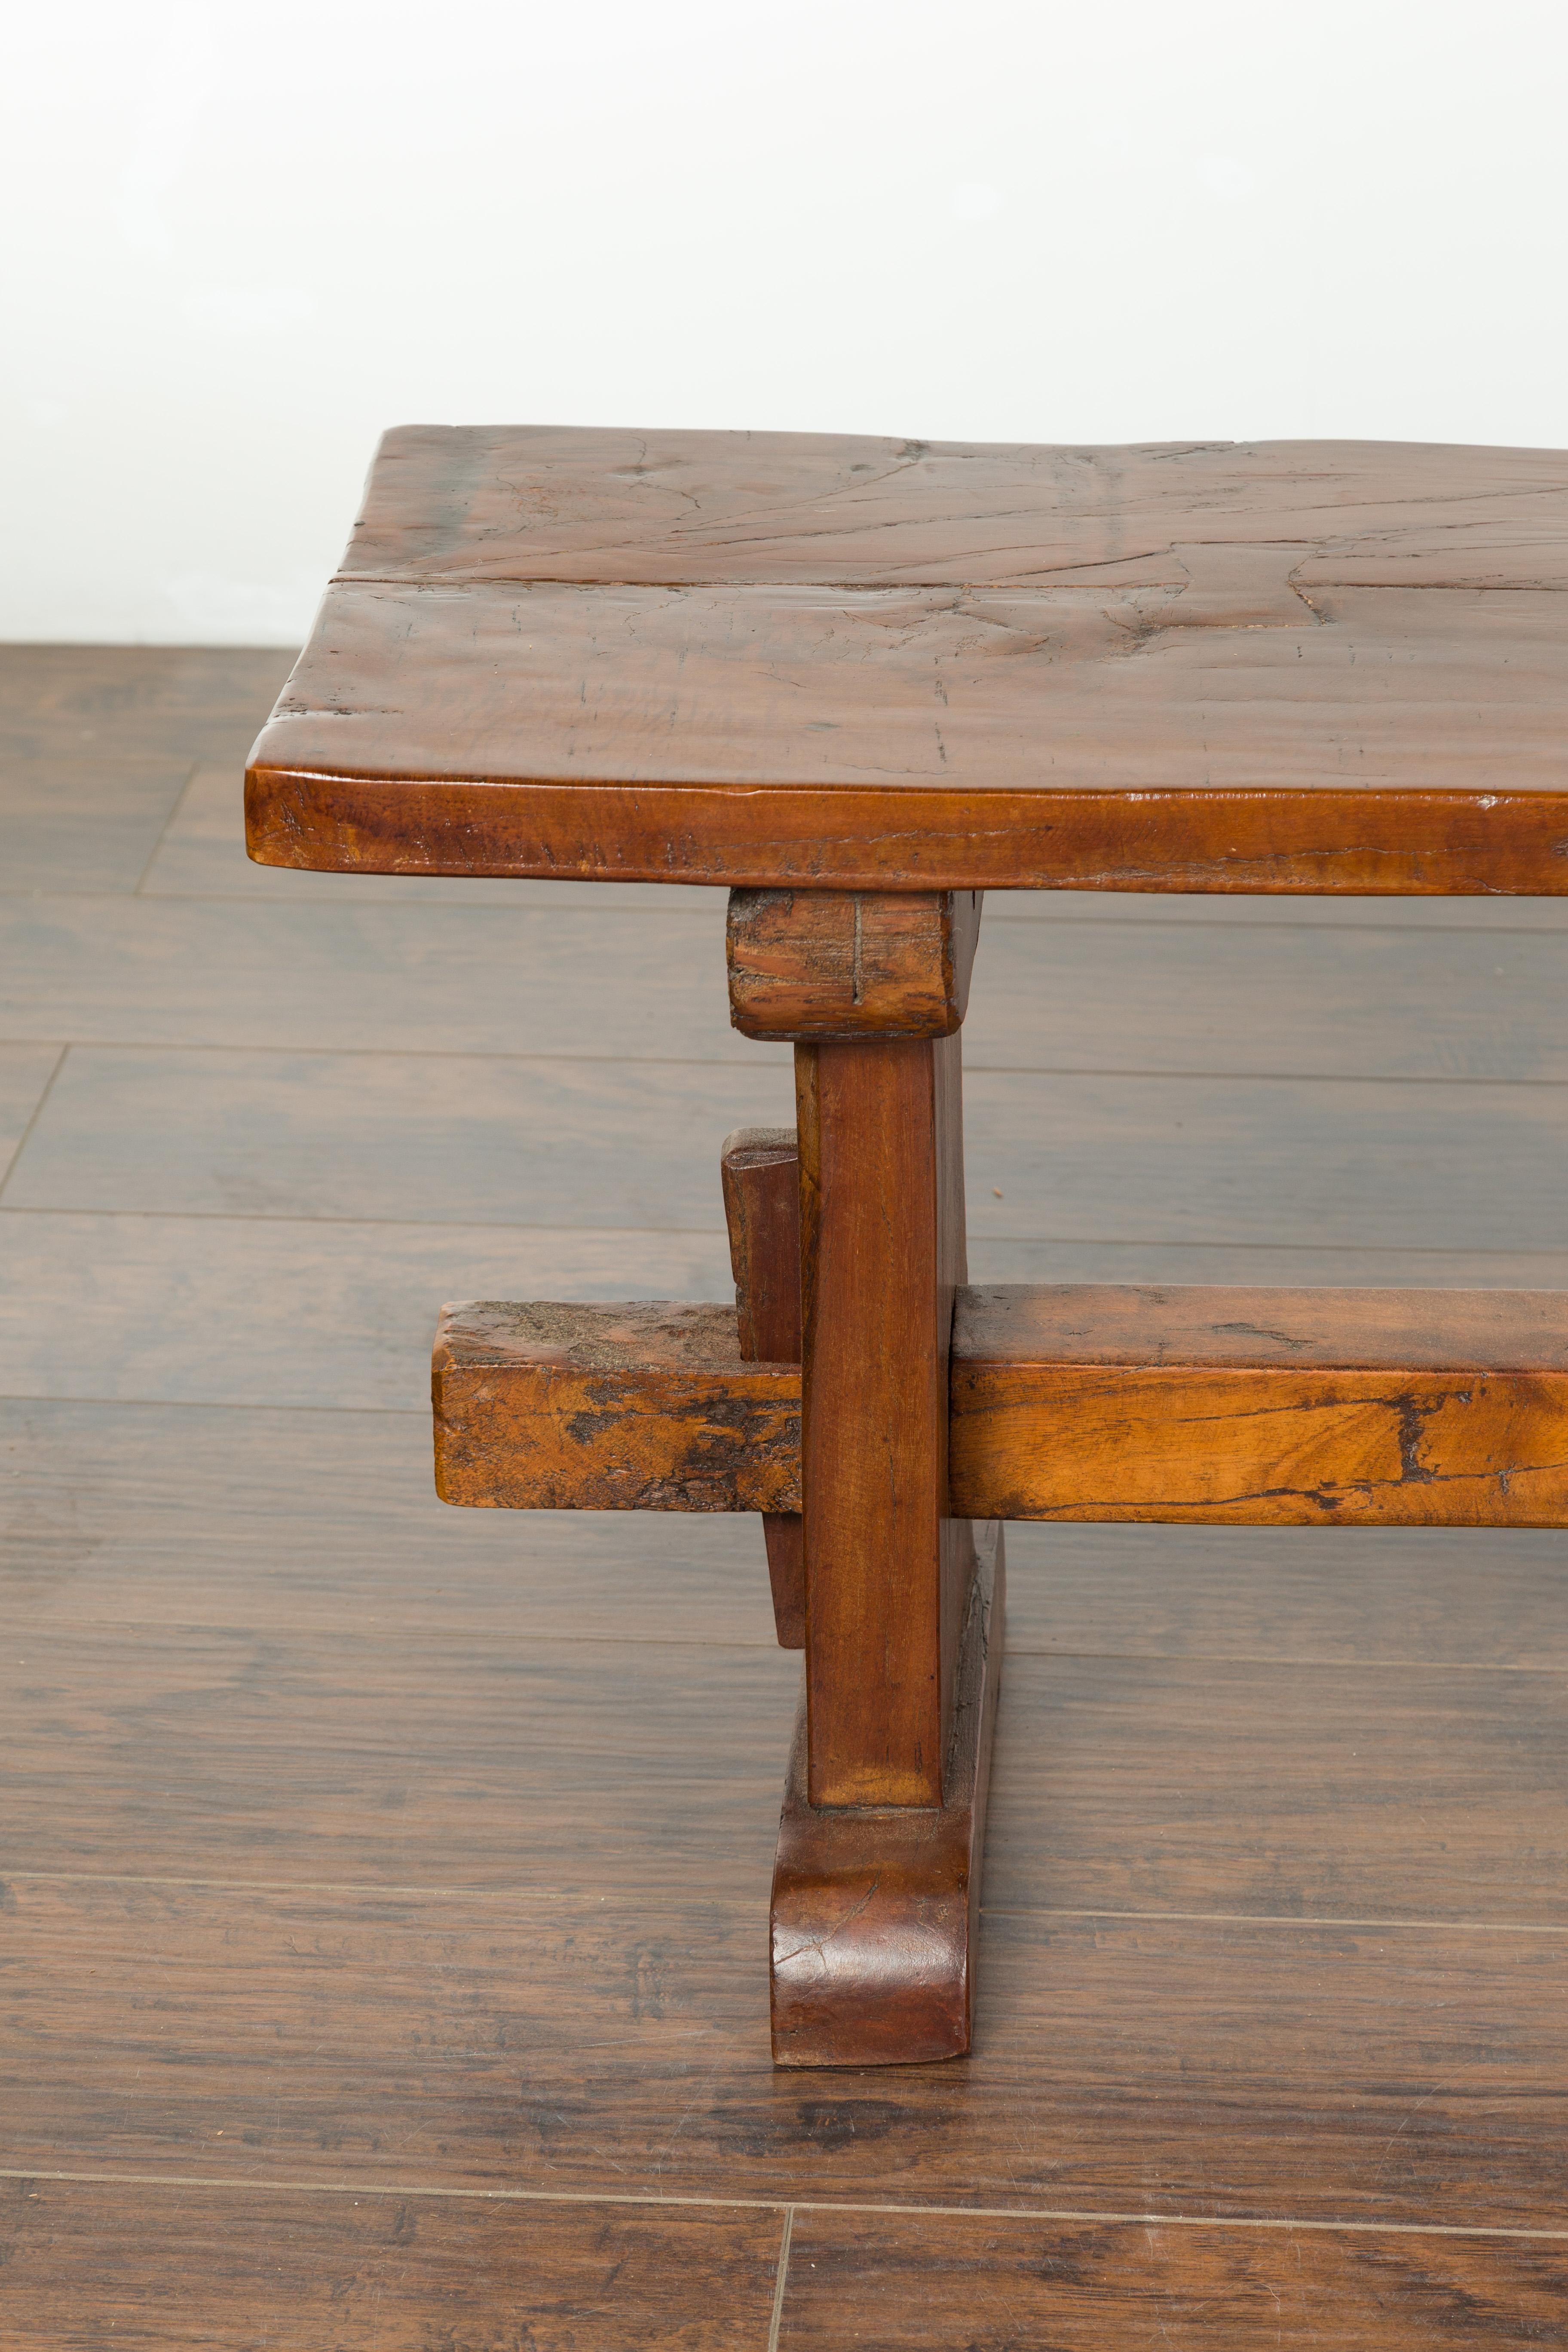 Rustic Italian Walnut Bench with Trestle Base from the Early 19th Century 6